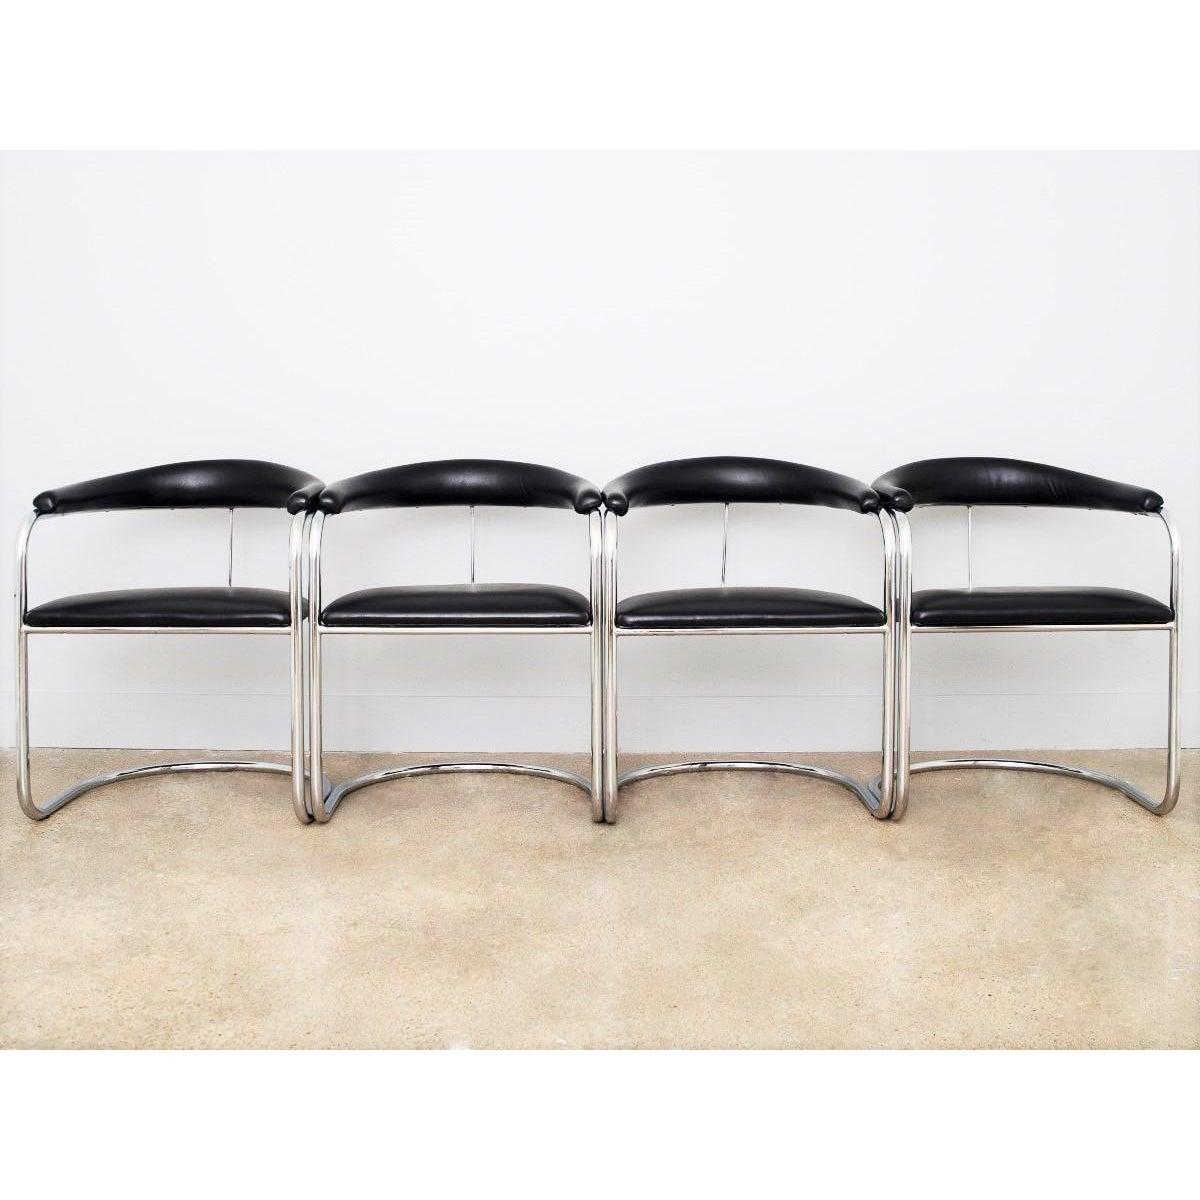 The Hungarian designer Anton Lorenz is famous for his timeless steel tube furniture. The original cantilevered chrome base and professionally upholstered in black.